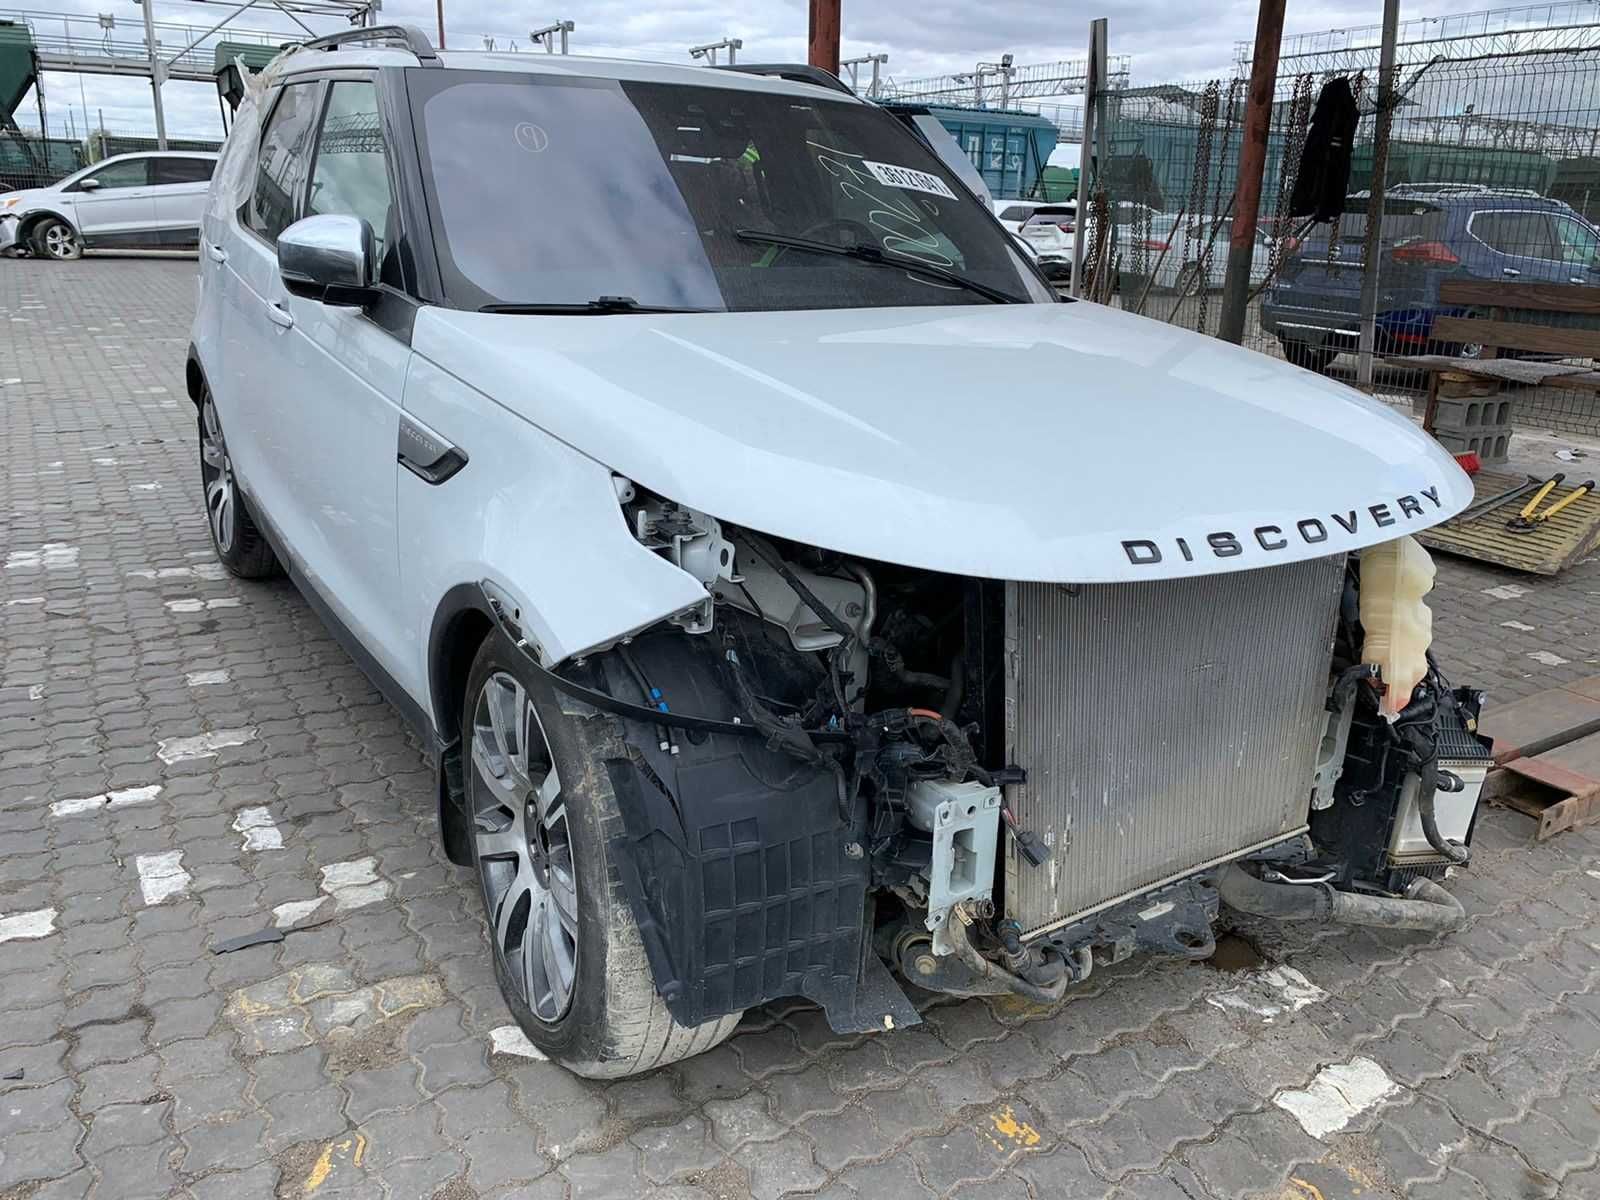 Land Rover Discovey 5, 3.0 diesel, 3.0 SC  запчасти, разборка